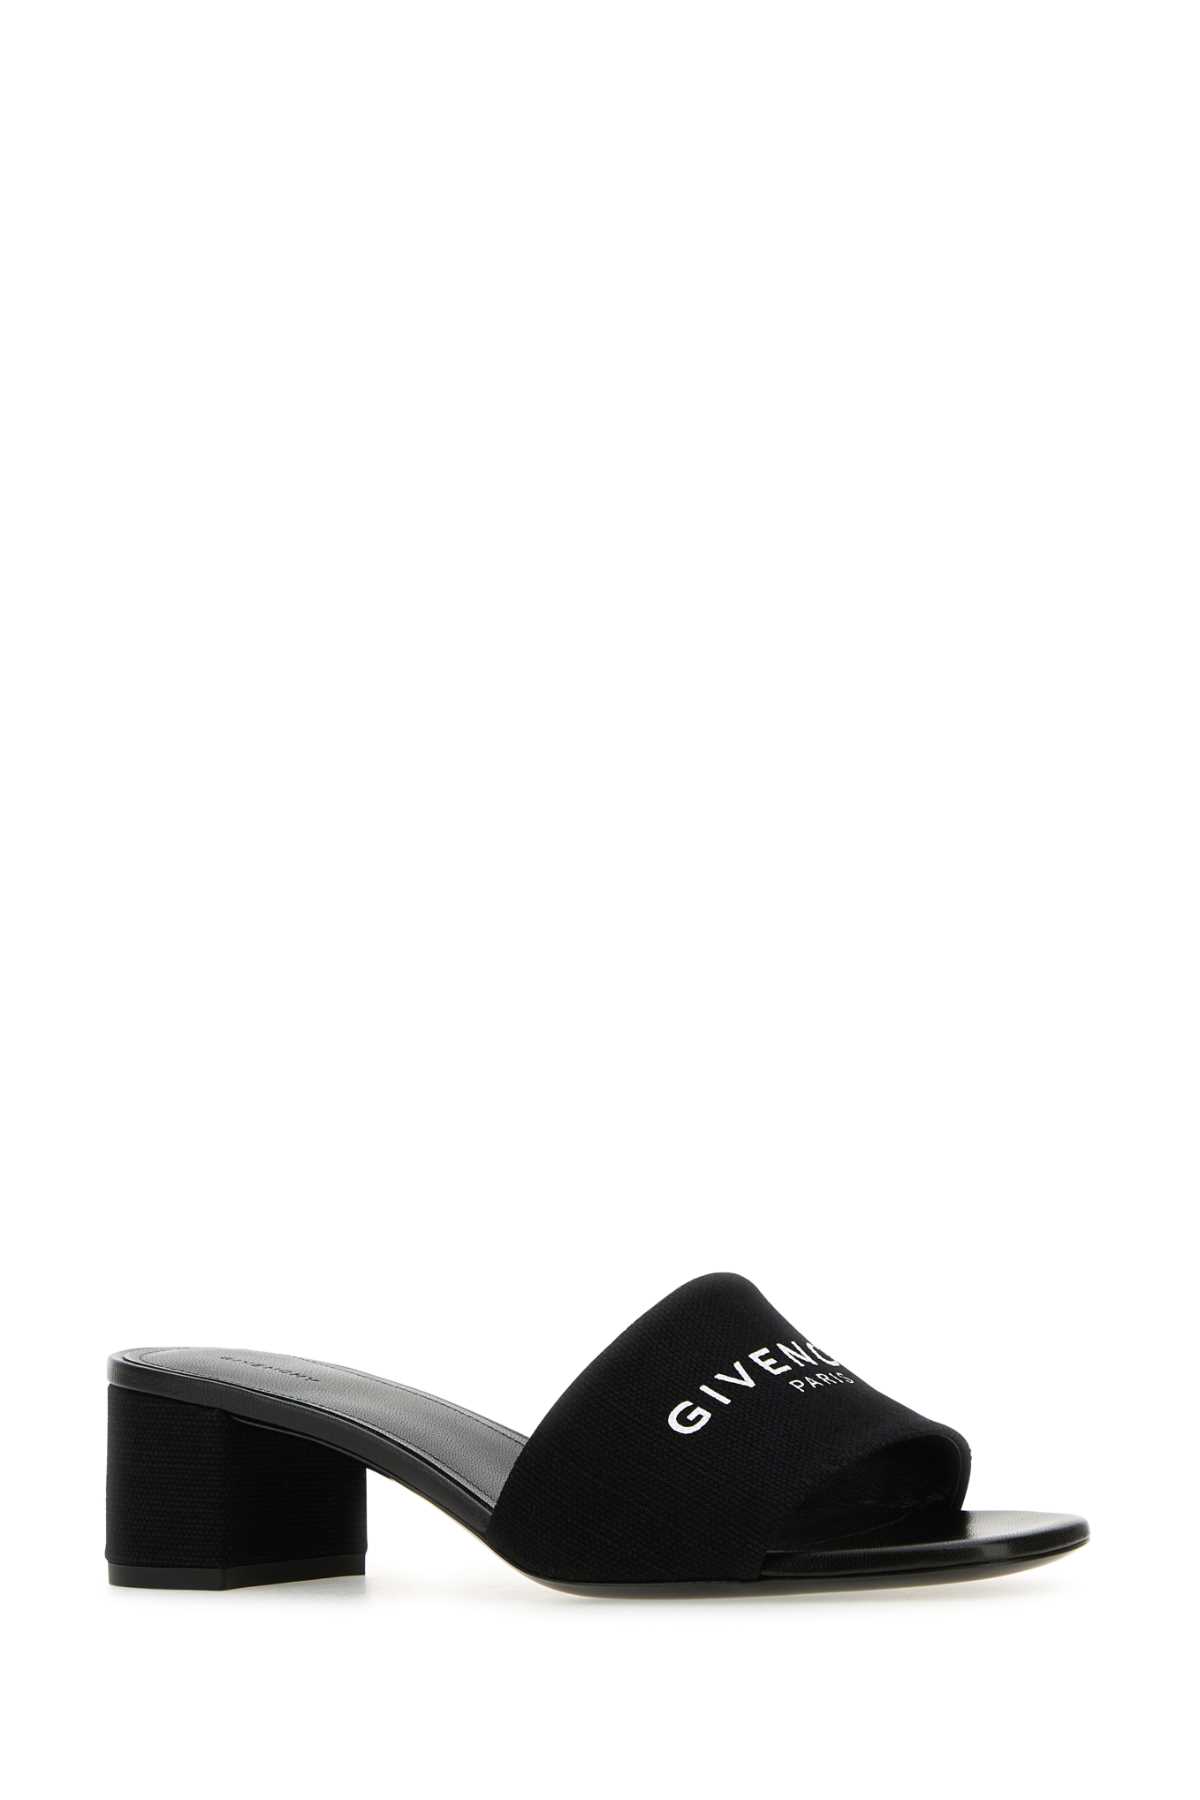 Givenchy Black Canvas 4g Mules